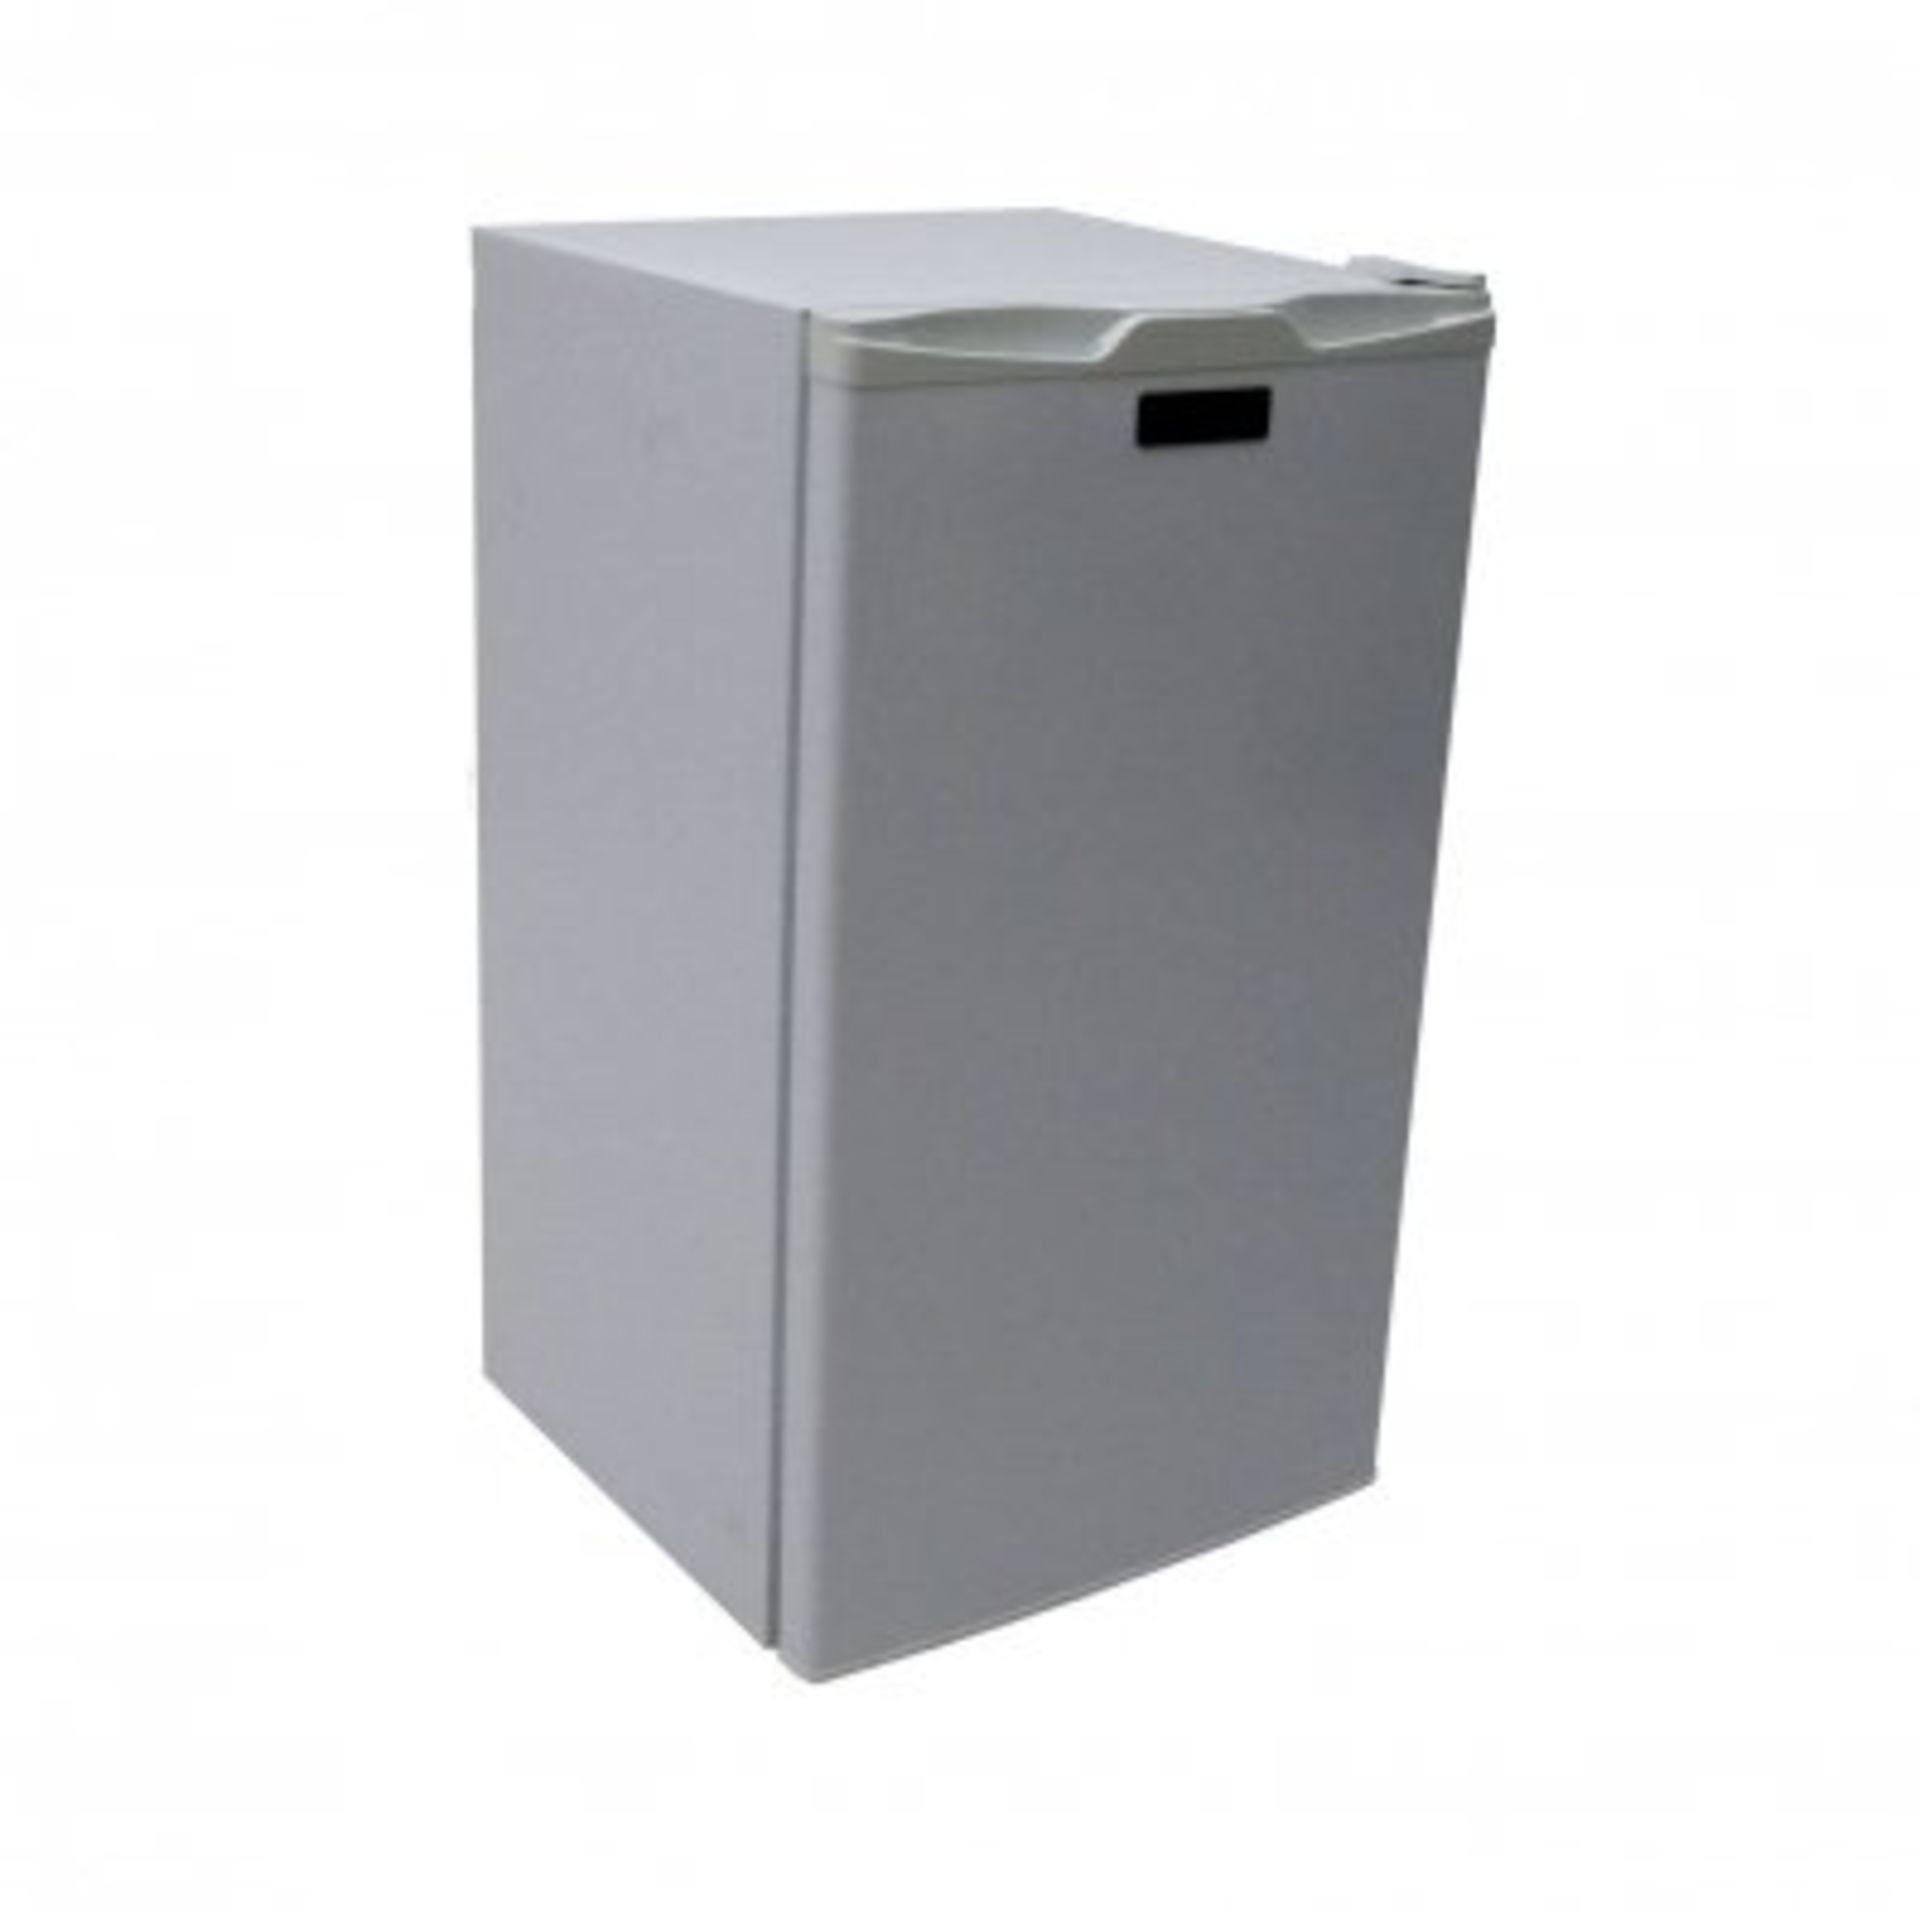 (RU1) The under counter 90L fridge offers a space saving compact design with all the top qualit...